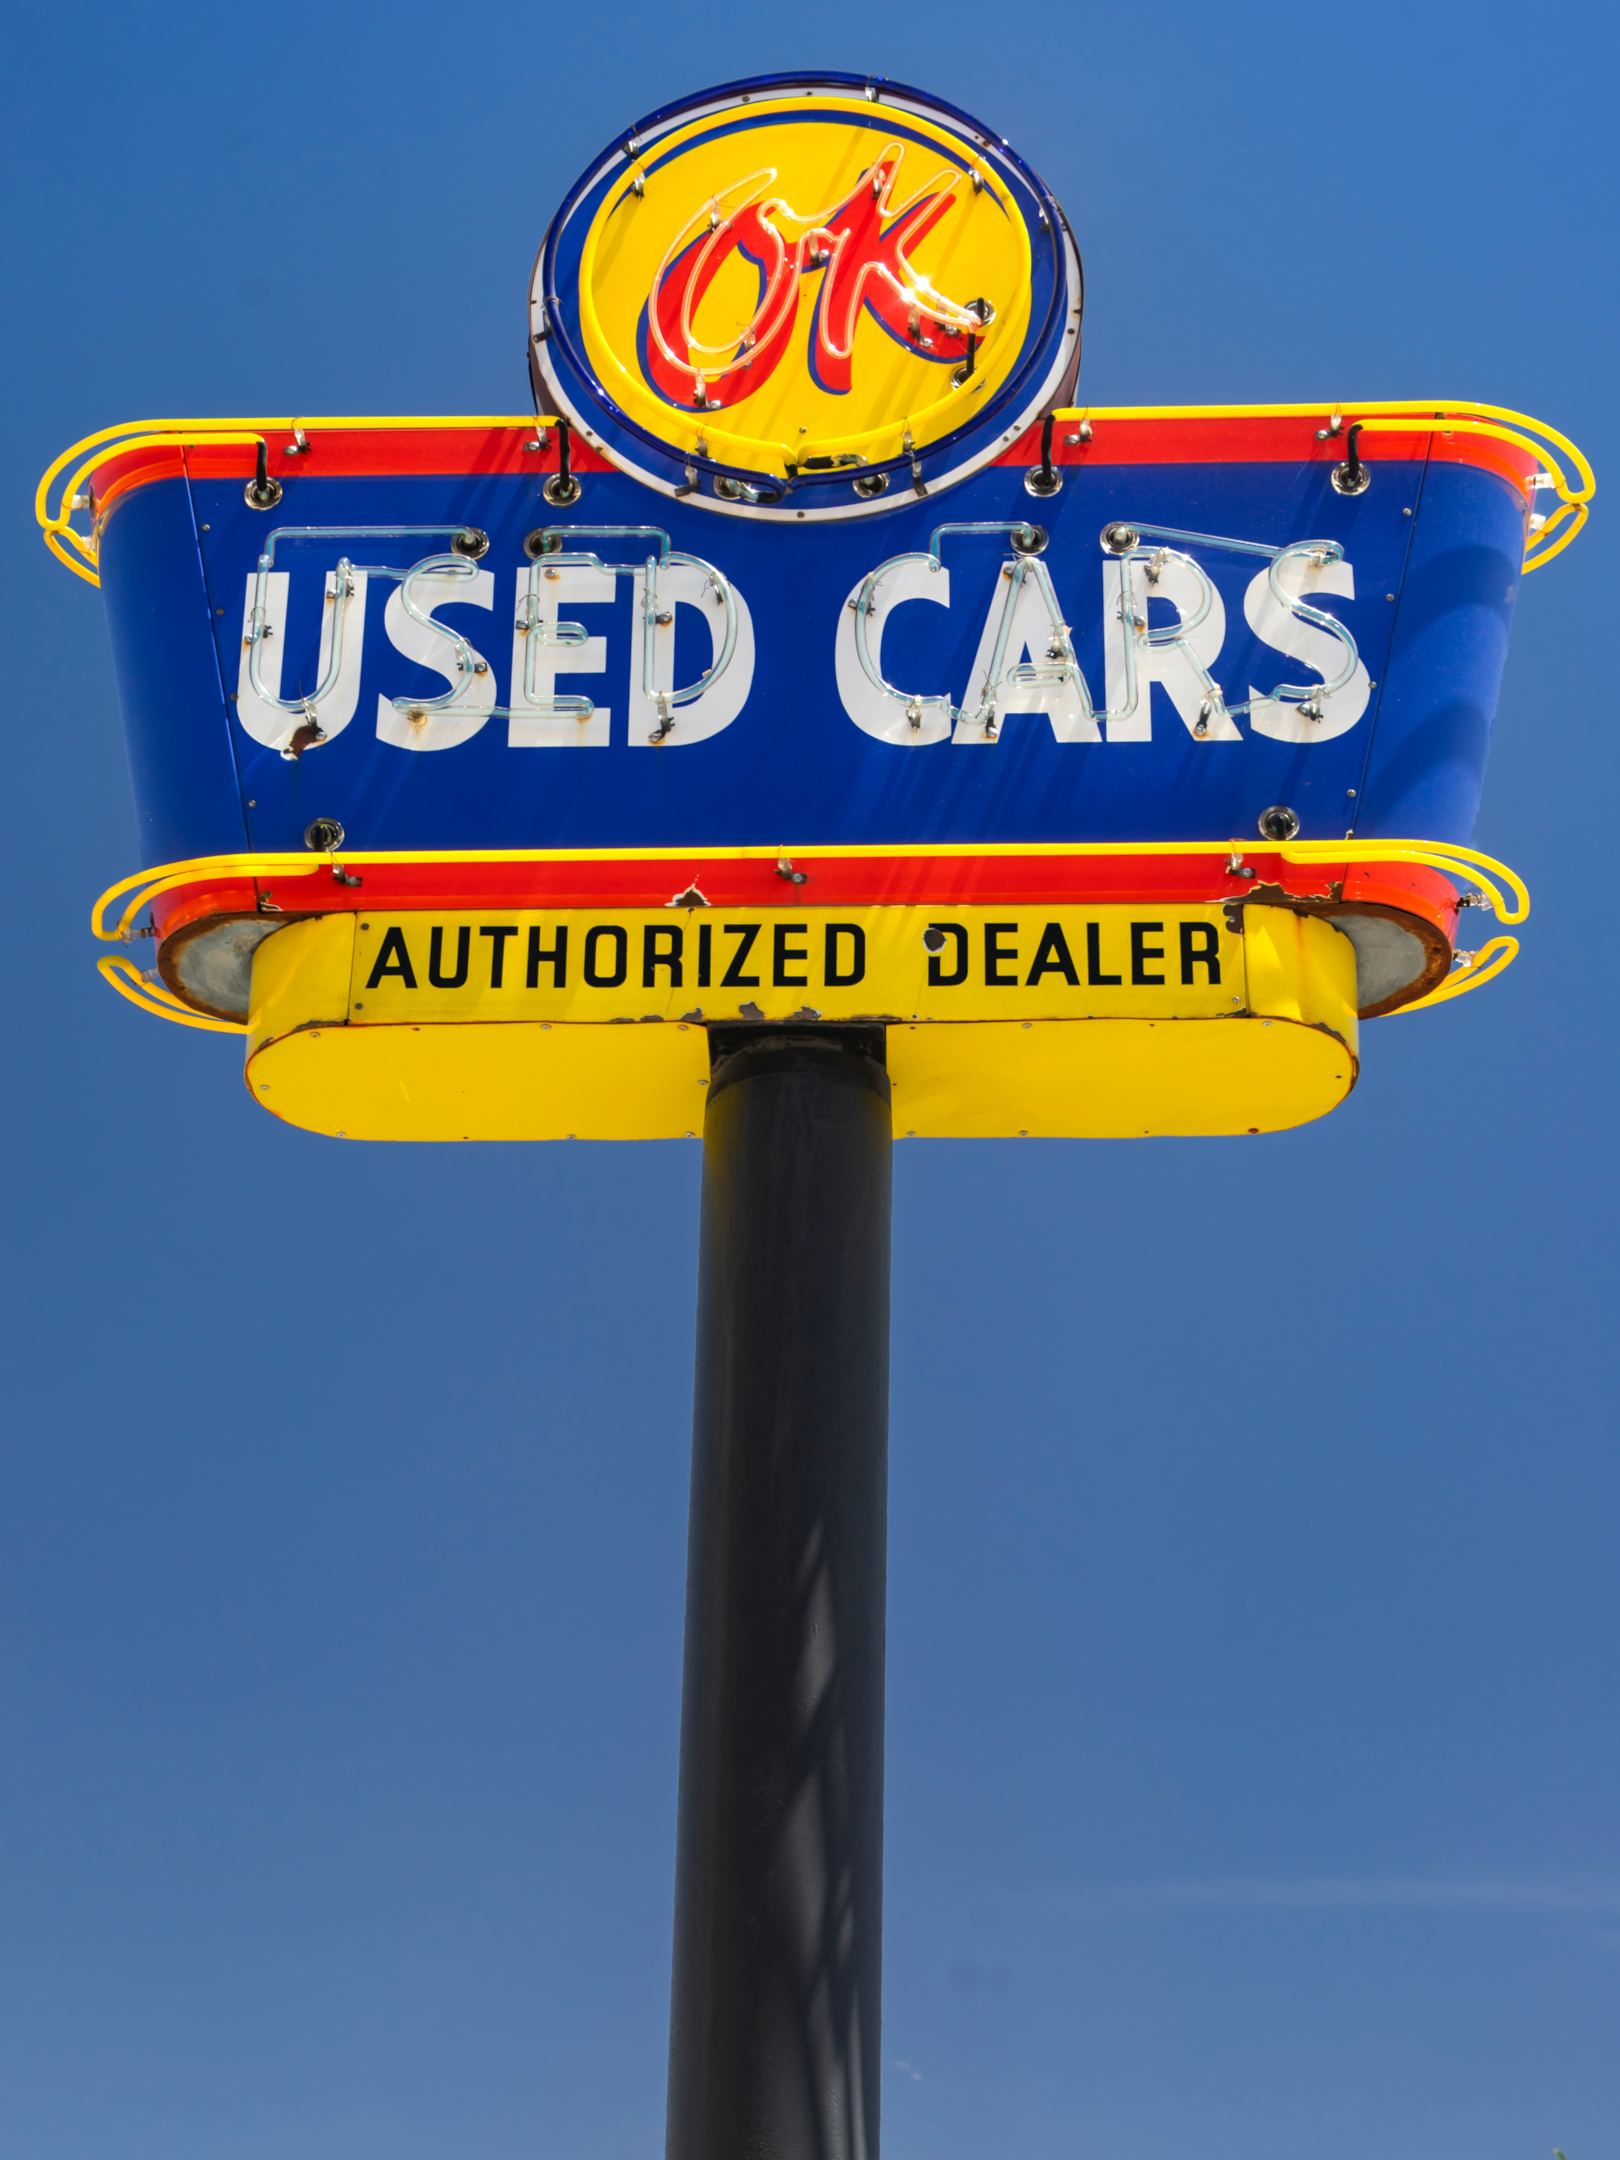 An authorized dealer of used cars. 